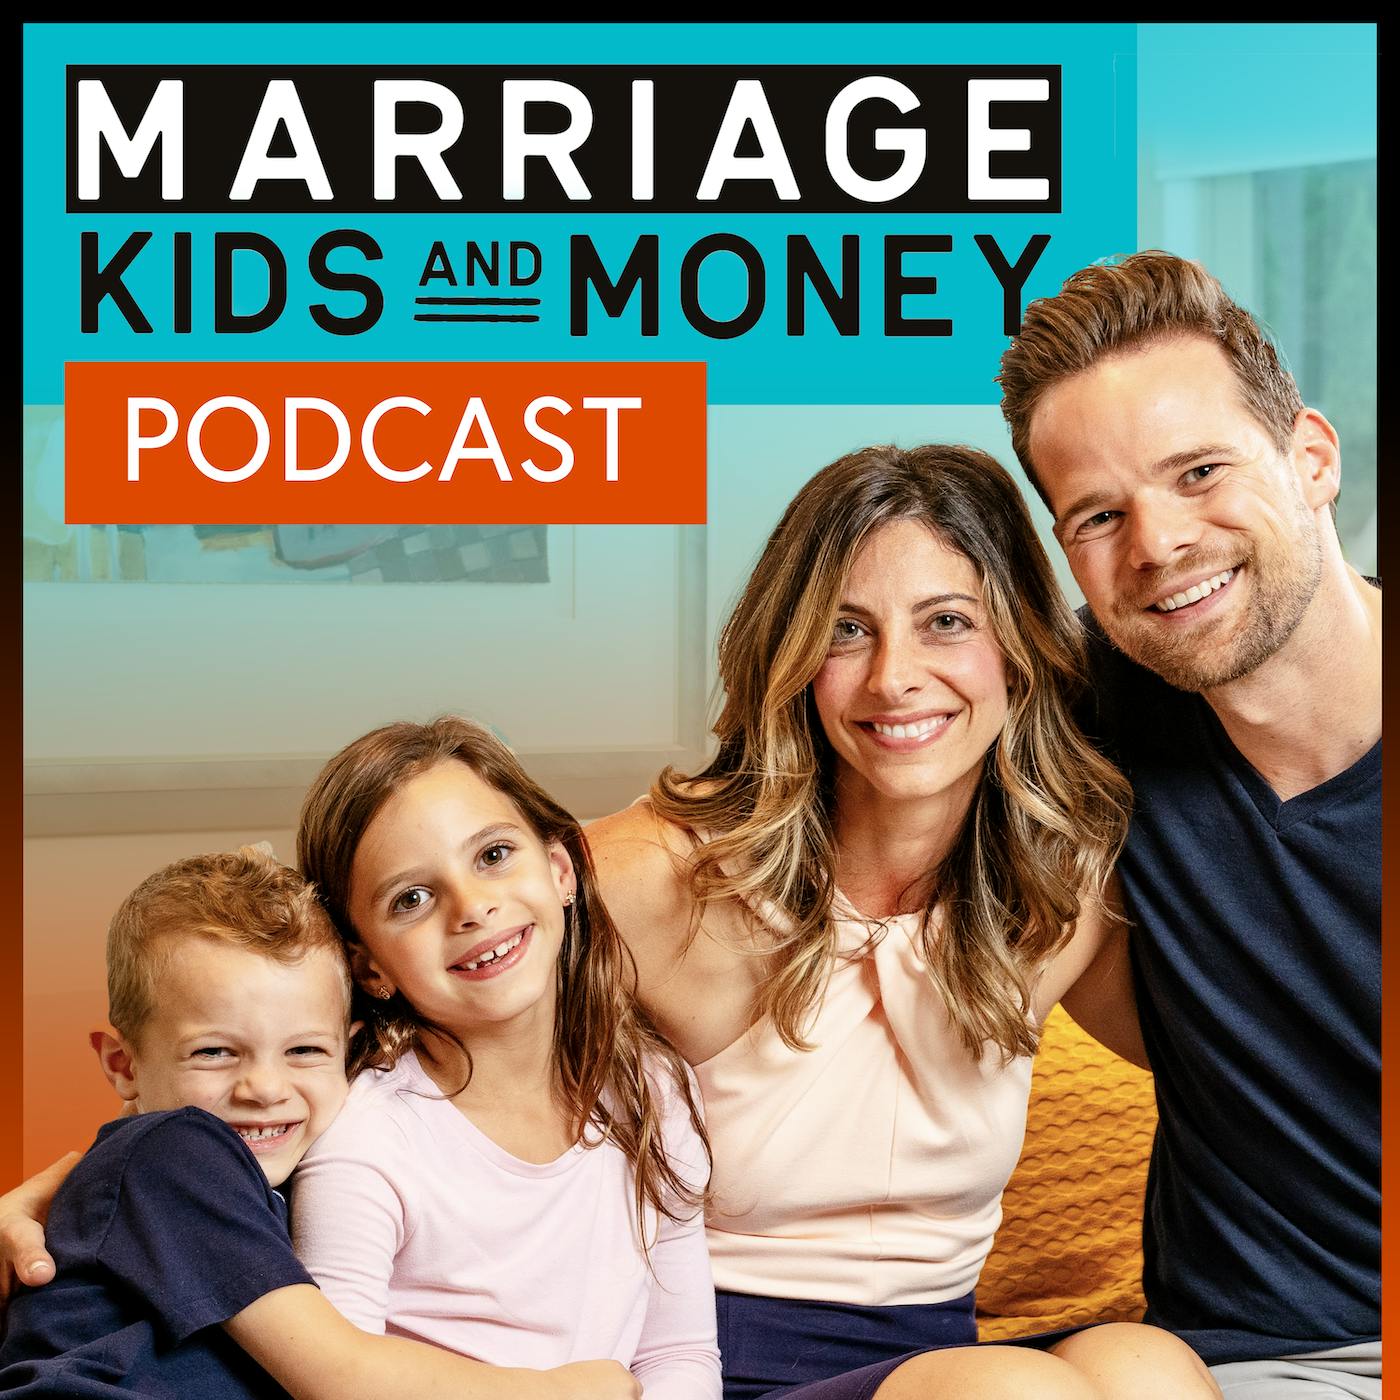 50% to 10%: Why We're Happy Saving Less + Boring Investing Made Us Millionaires [w/ Mandy & Sean Senske]